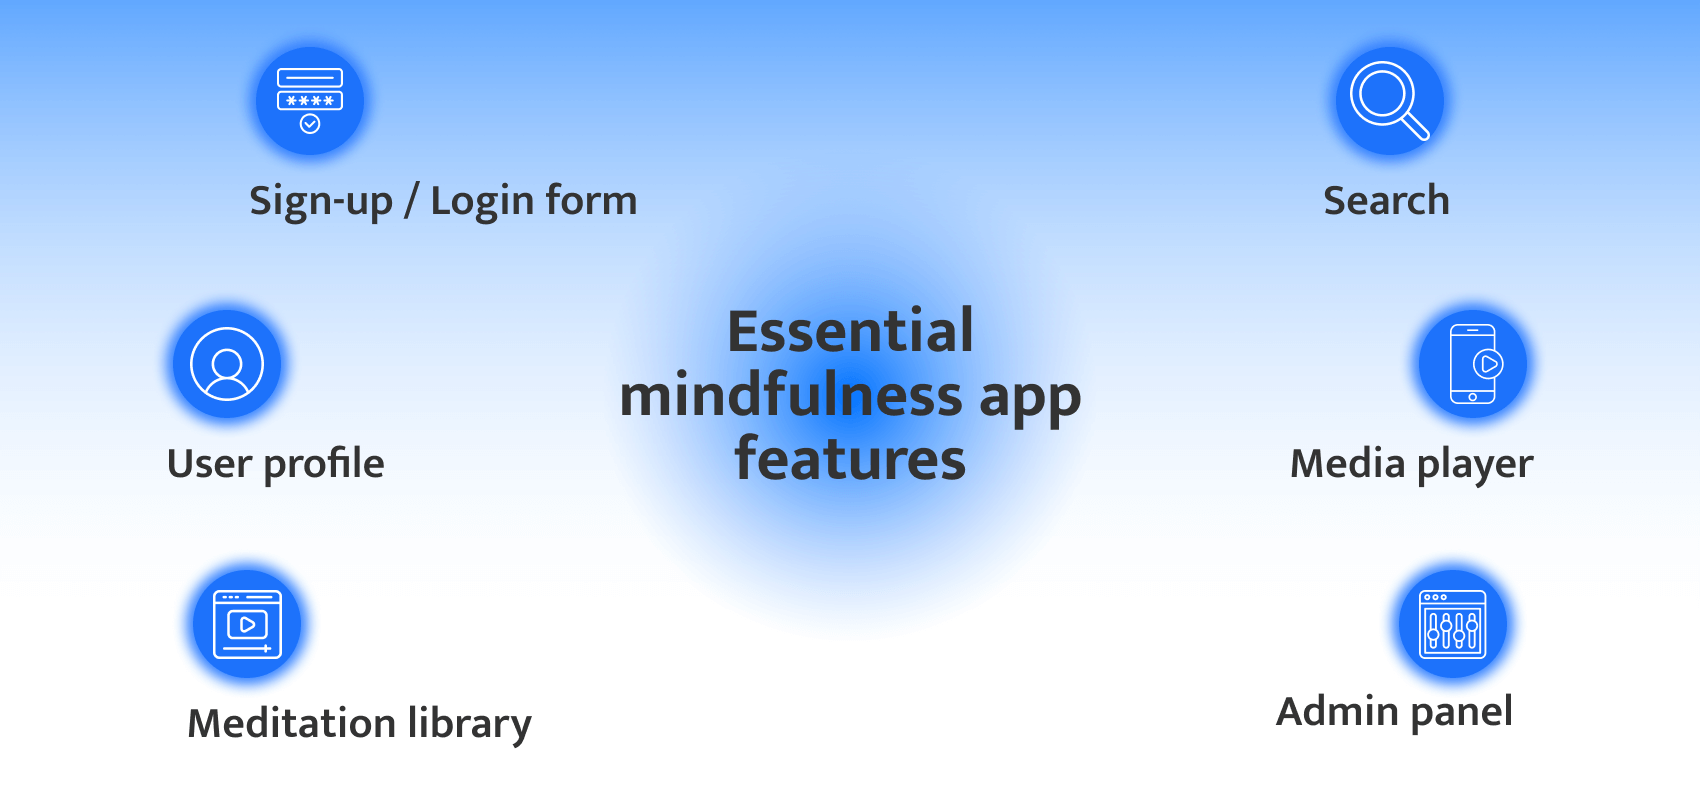 Meditation apps might calm you – but miss the point of Buddhist